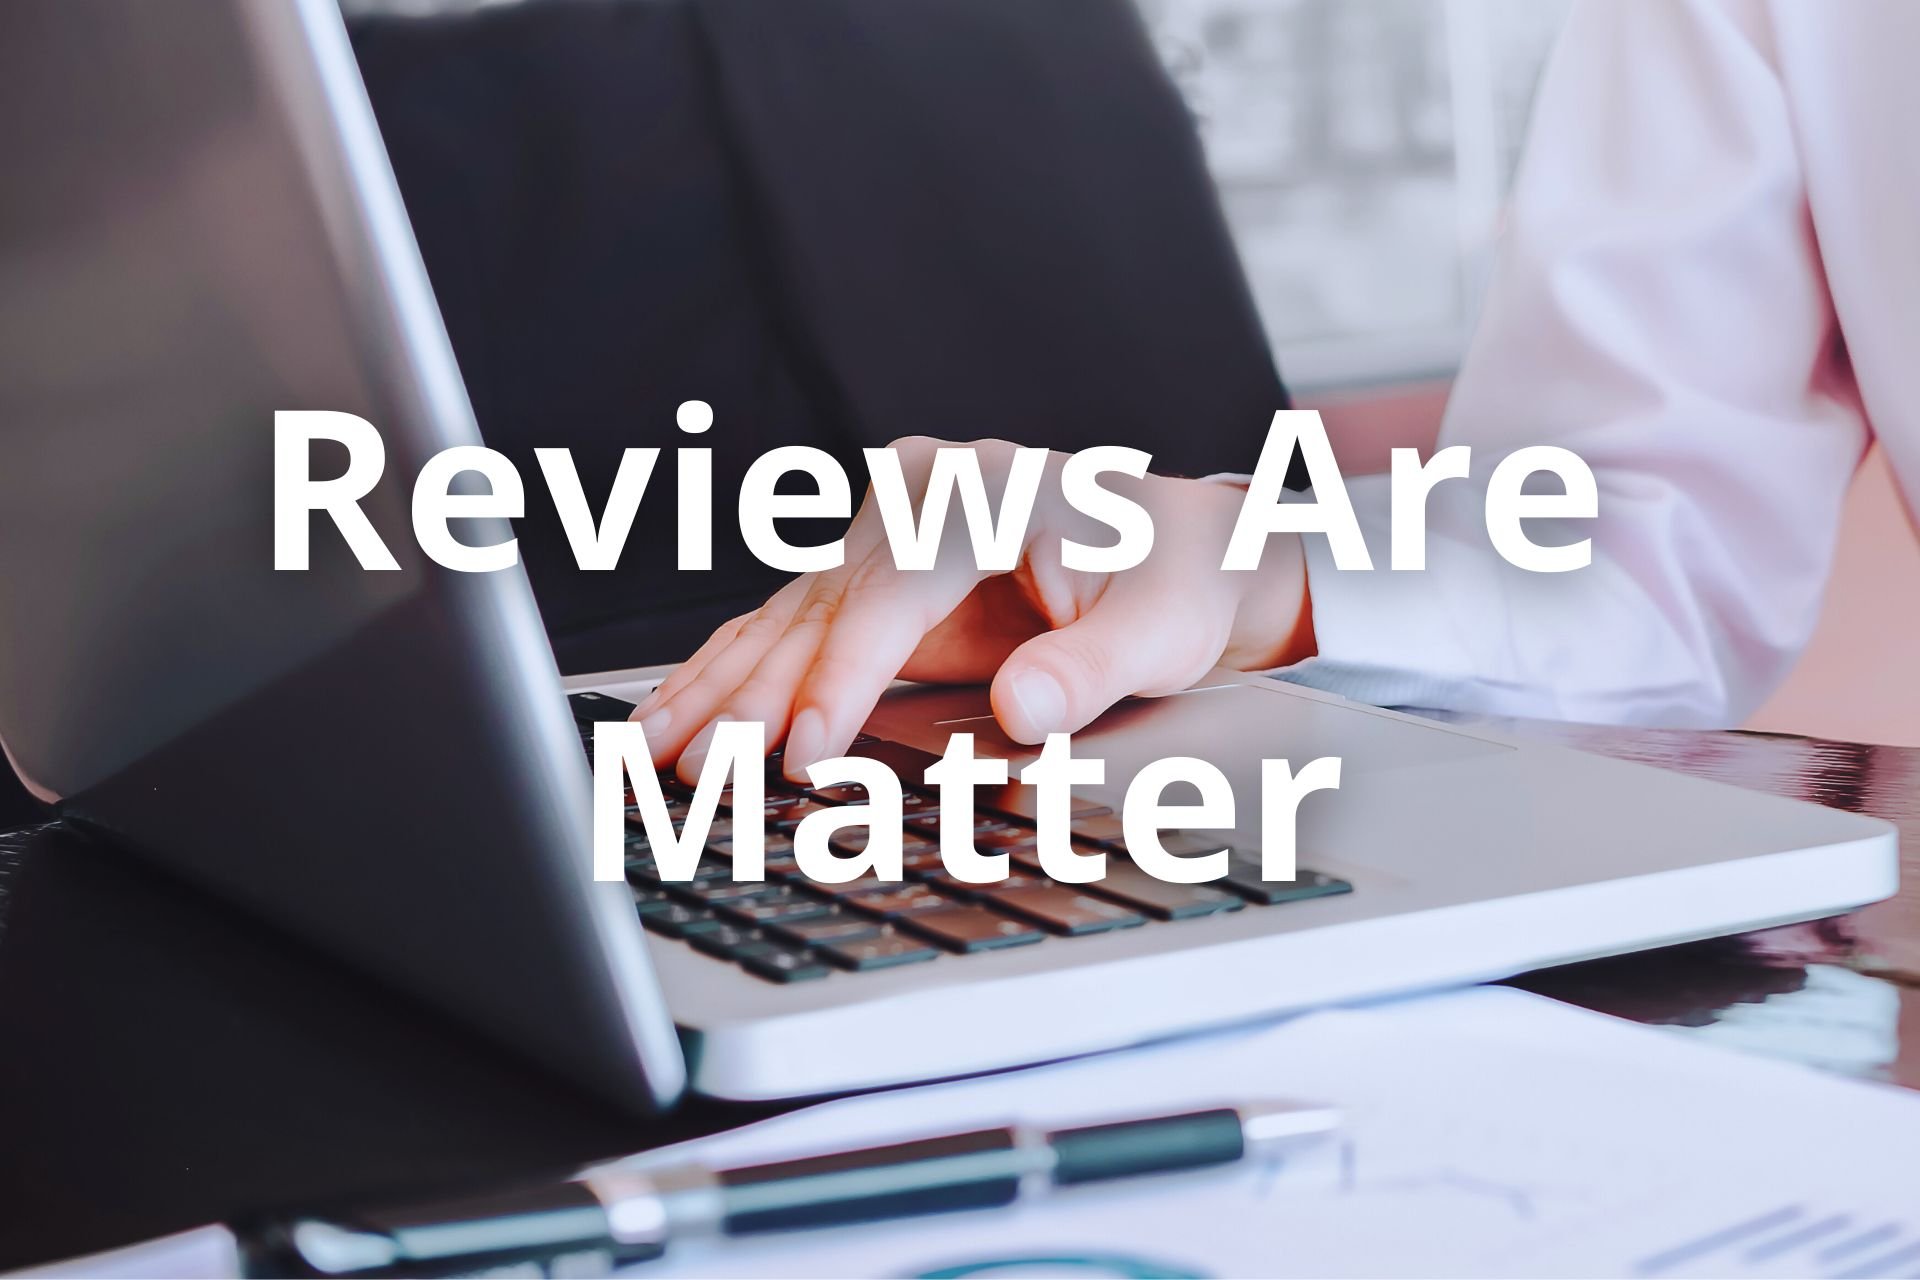 Reviews Are Matter